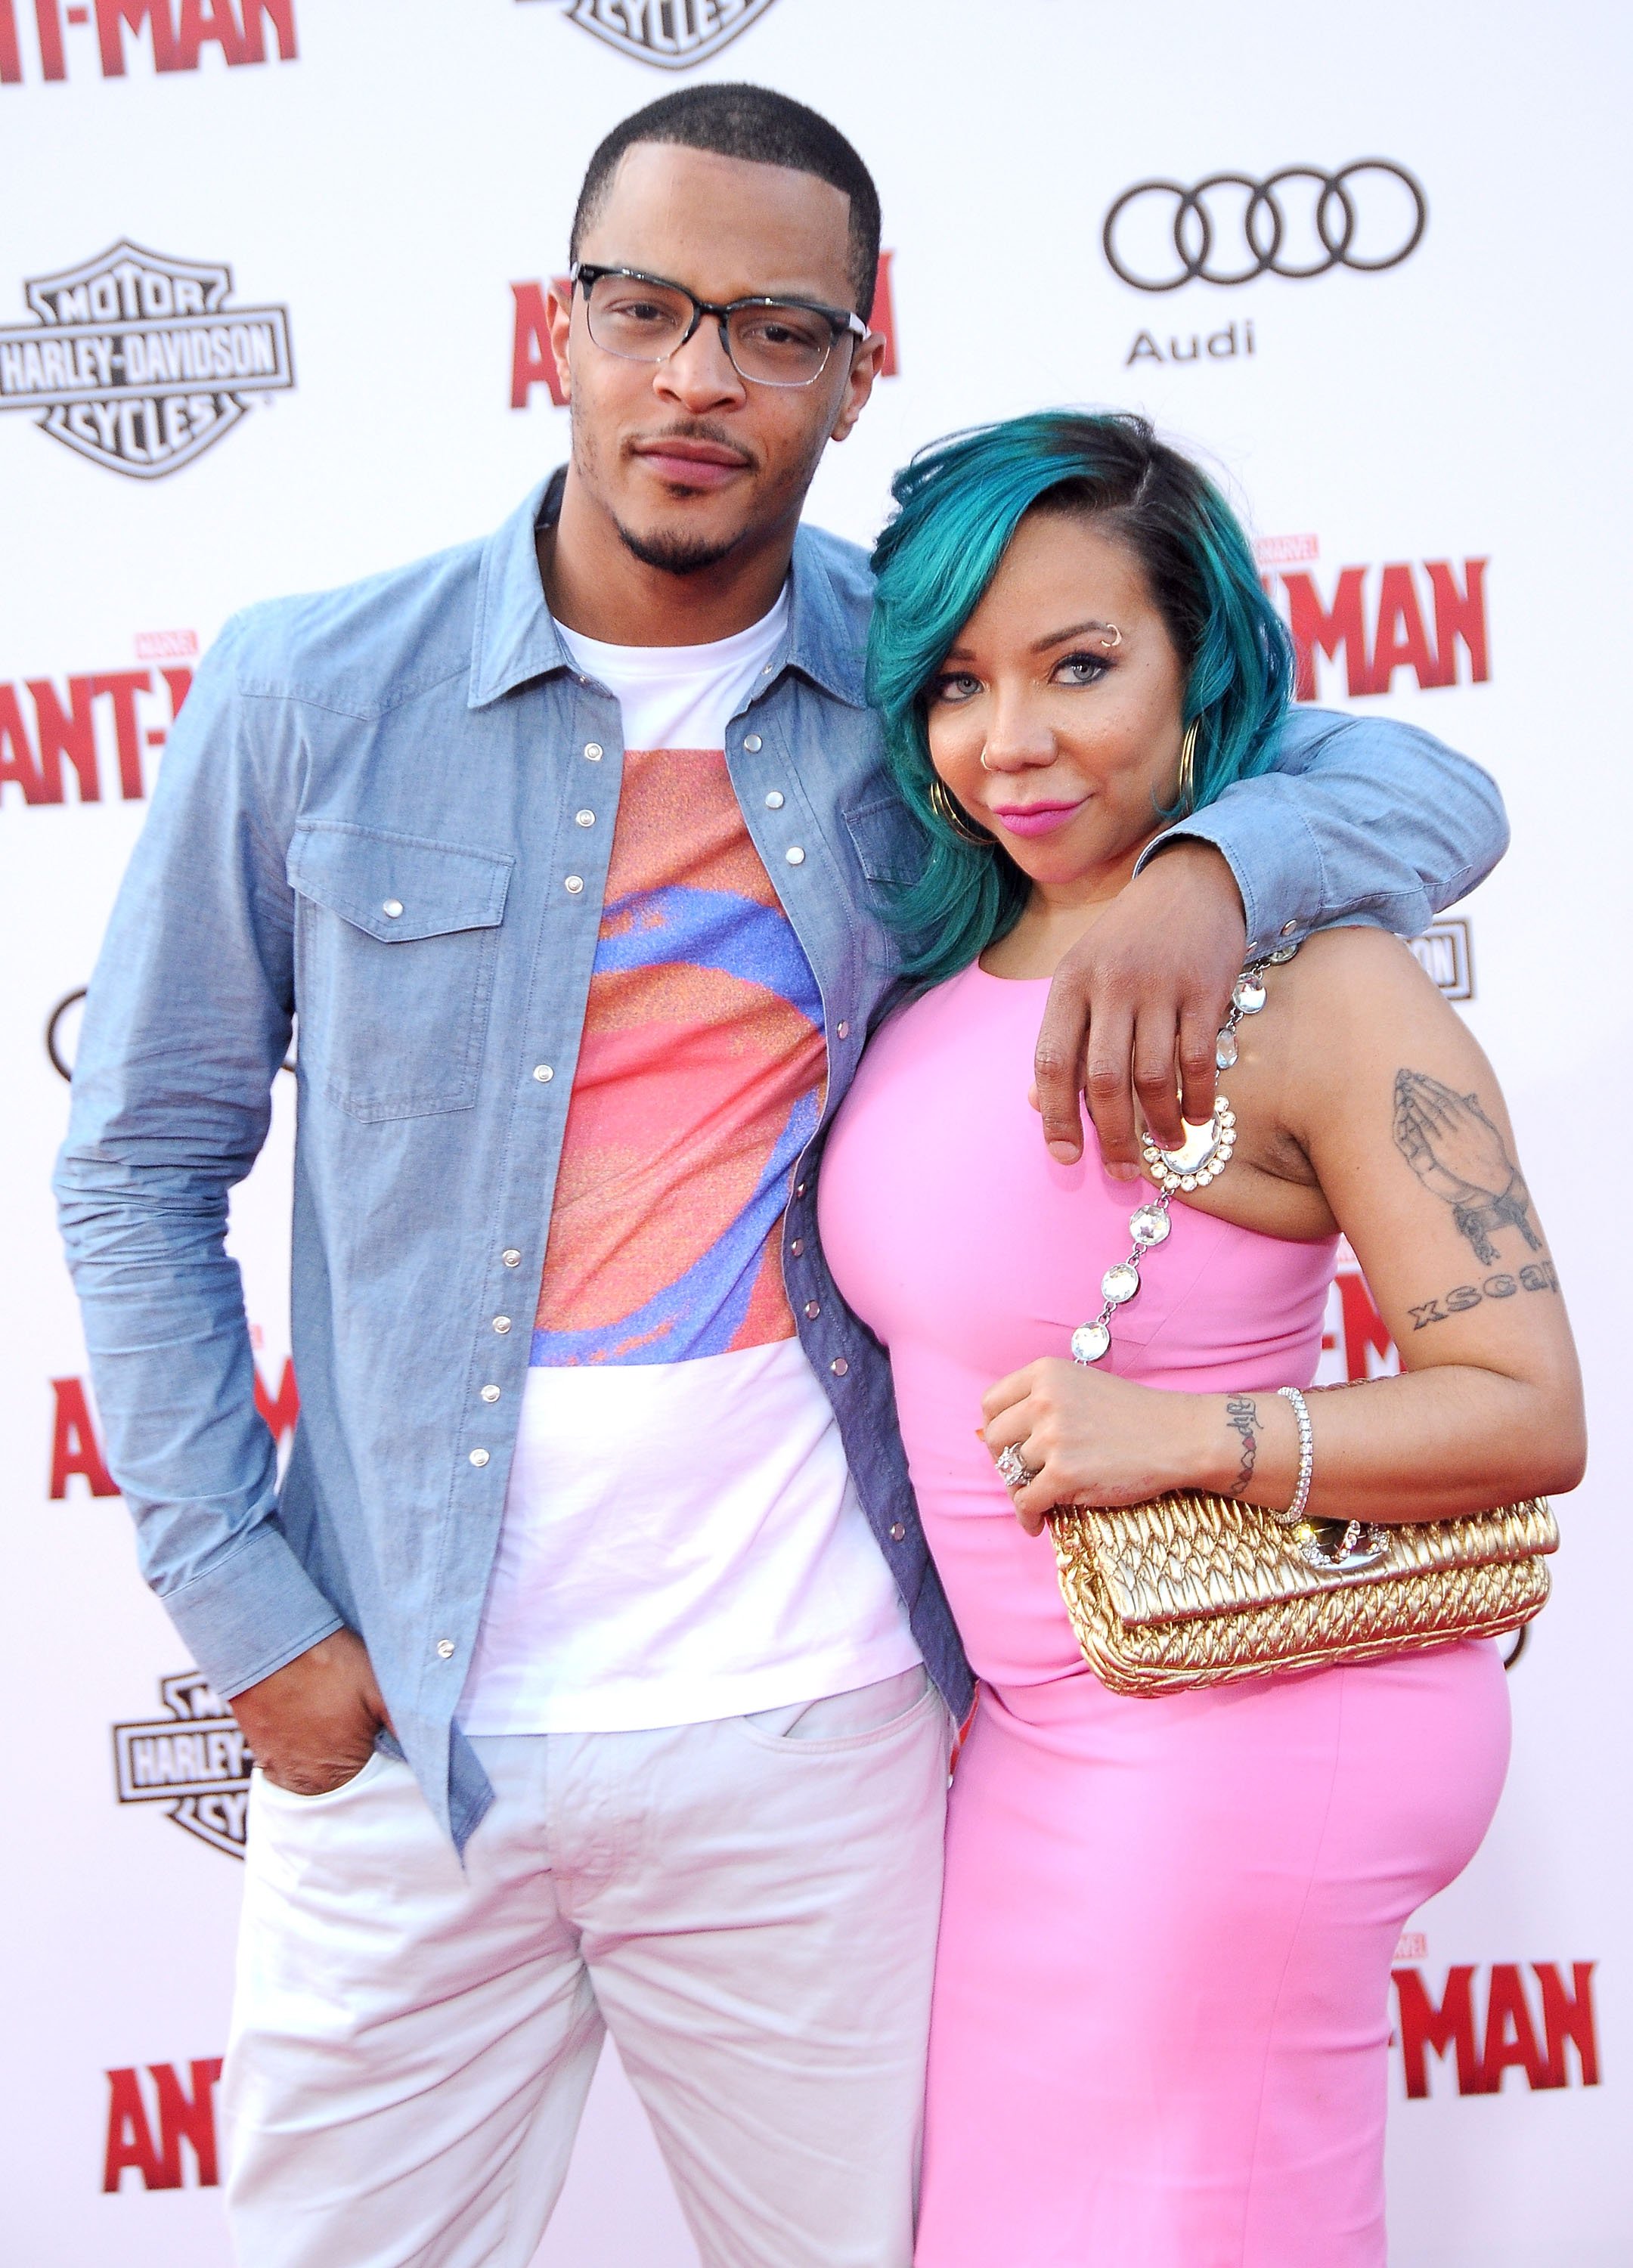 T.I. and Tiny at the Premiere of 'Ant-Man' at Dolby Theatre on June 29, 2015 in Hollywood, California. | Photo: Getty Images